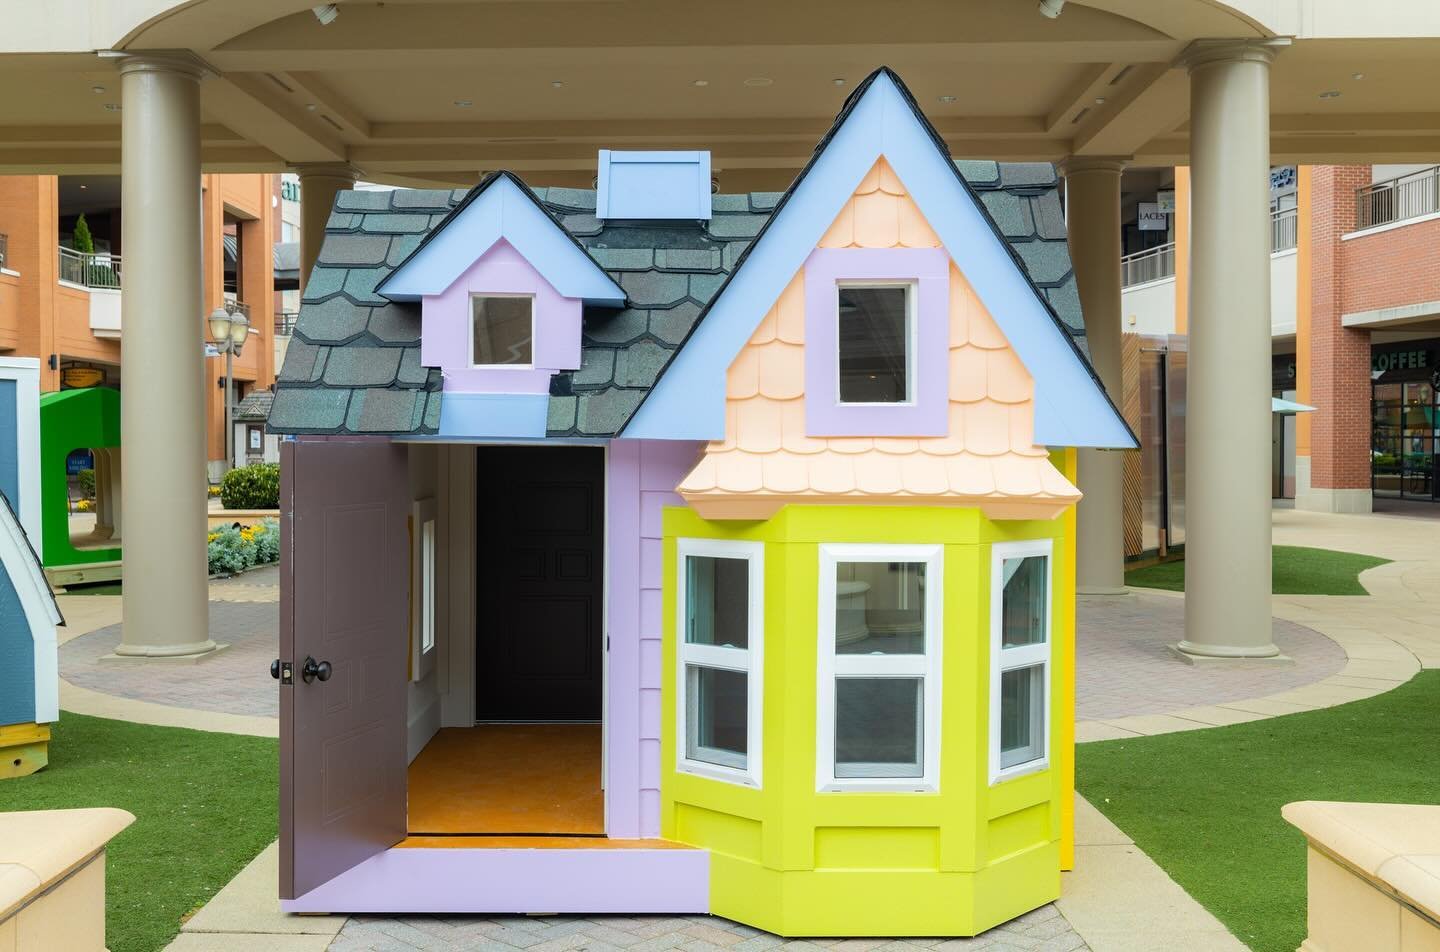 Our UP and Away Chalet has arrived at @shortpumpmall! Be sure to check it out in person between now and April 28!

HUGE shout to our partners: 
@smbwarchitects
@cross_timbers_roofing
@smartsiding
@84lumber
@deltaconstruction_
@hanoverspecialties

See